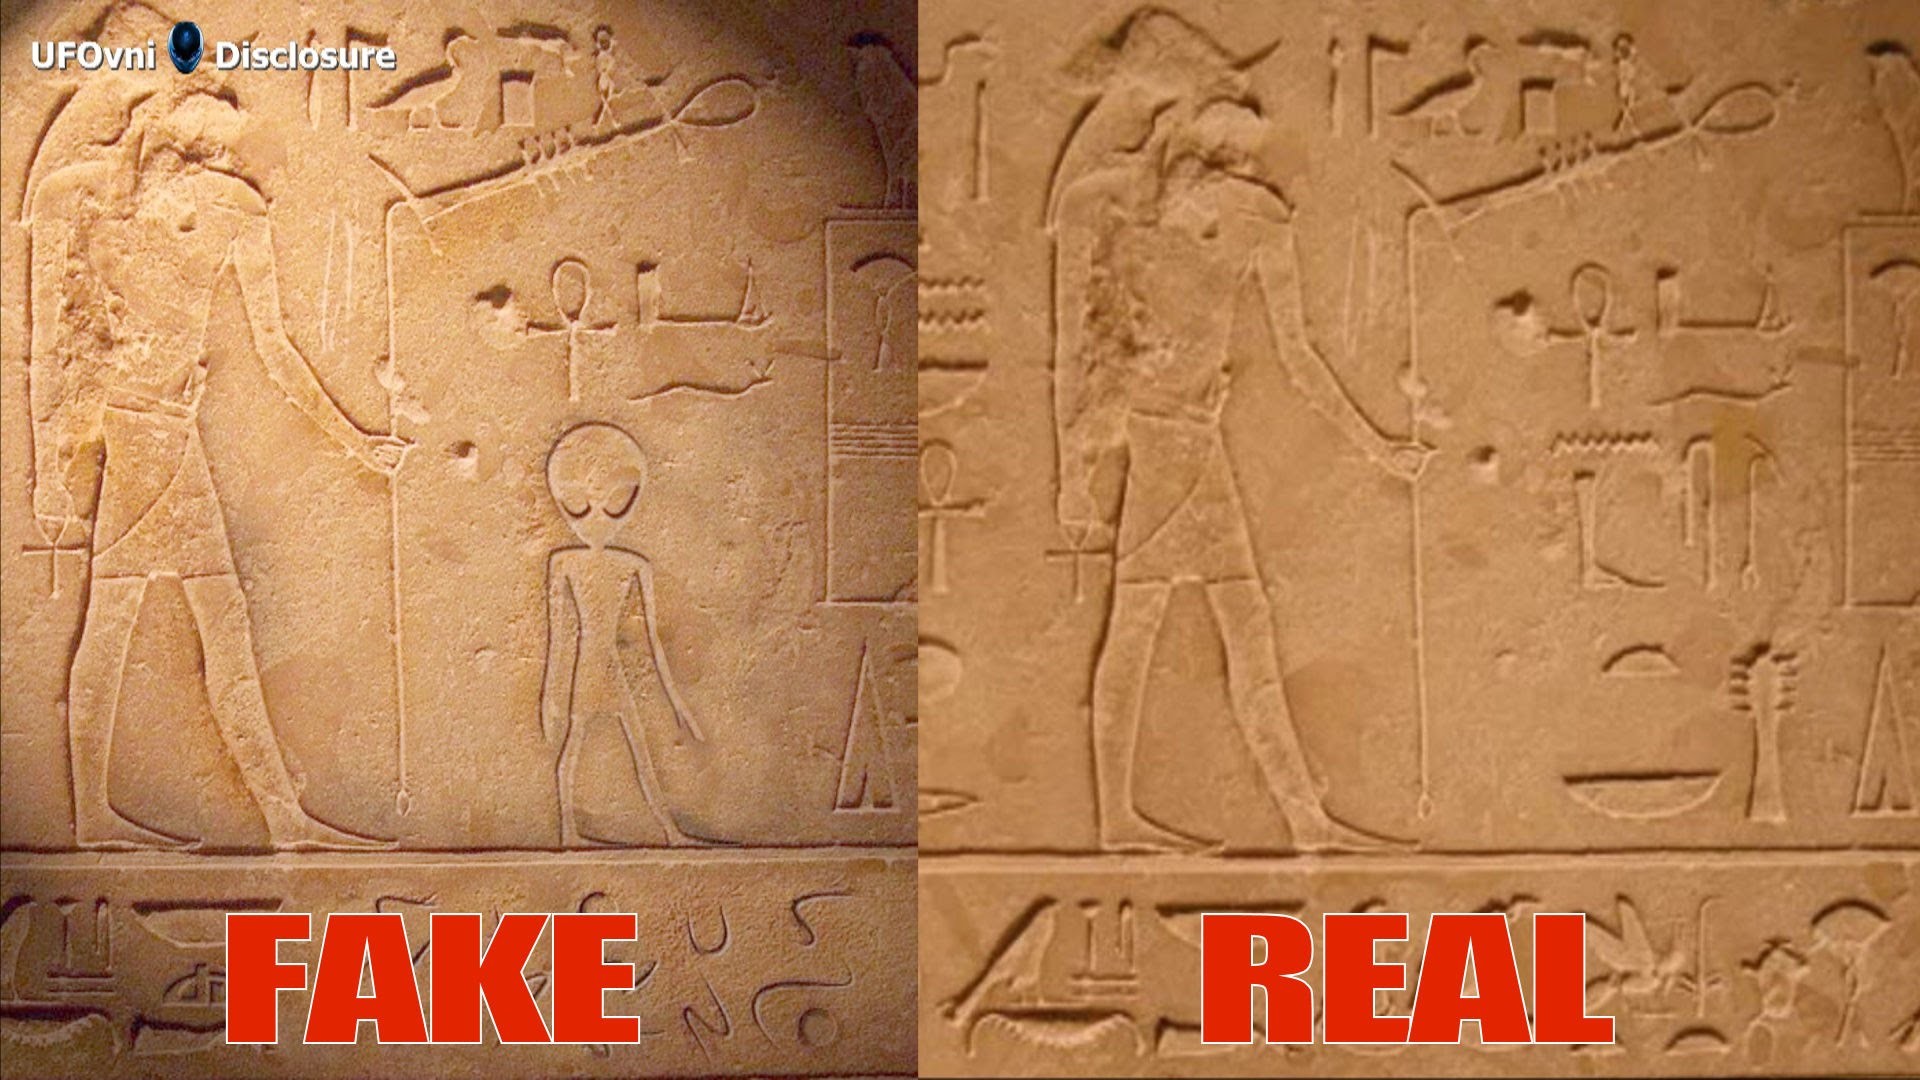 1920x1080 Extraterrestrial Hieroglyphics in Ancient Egypt? Real or Fake? - YouTube